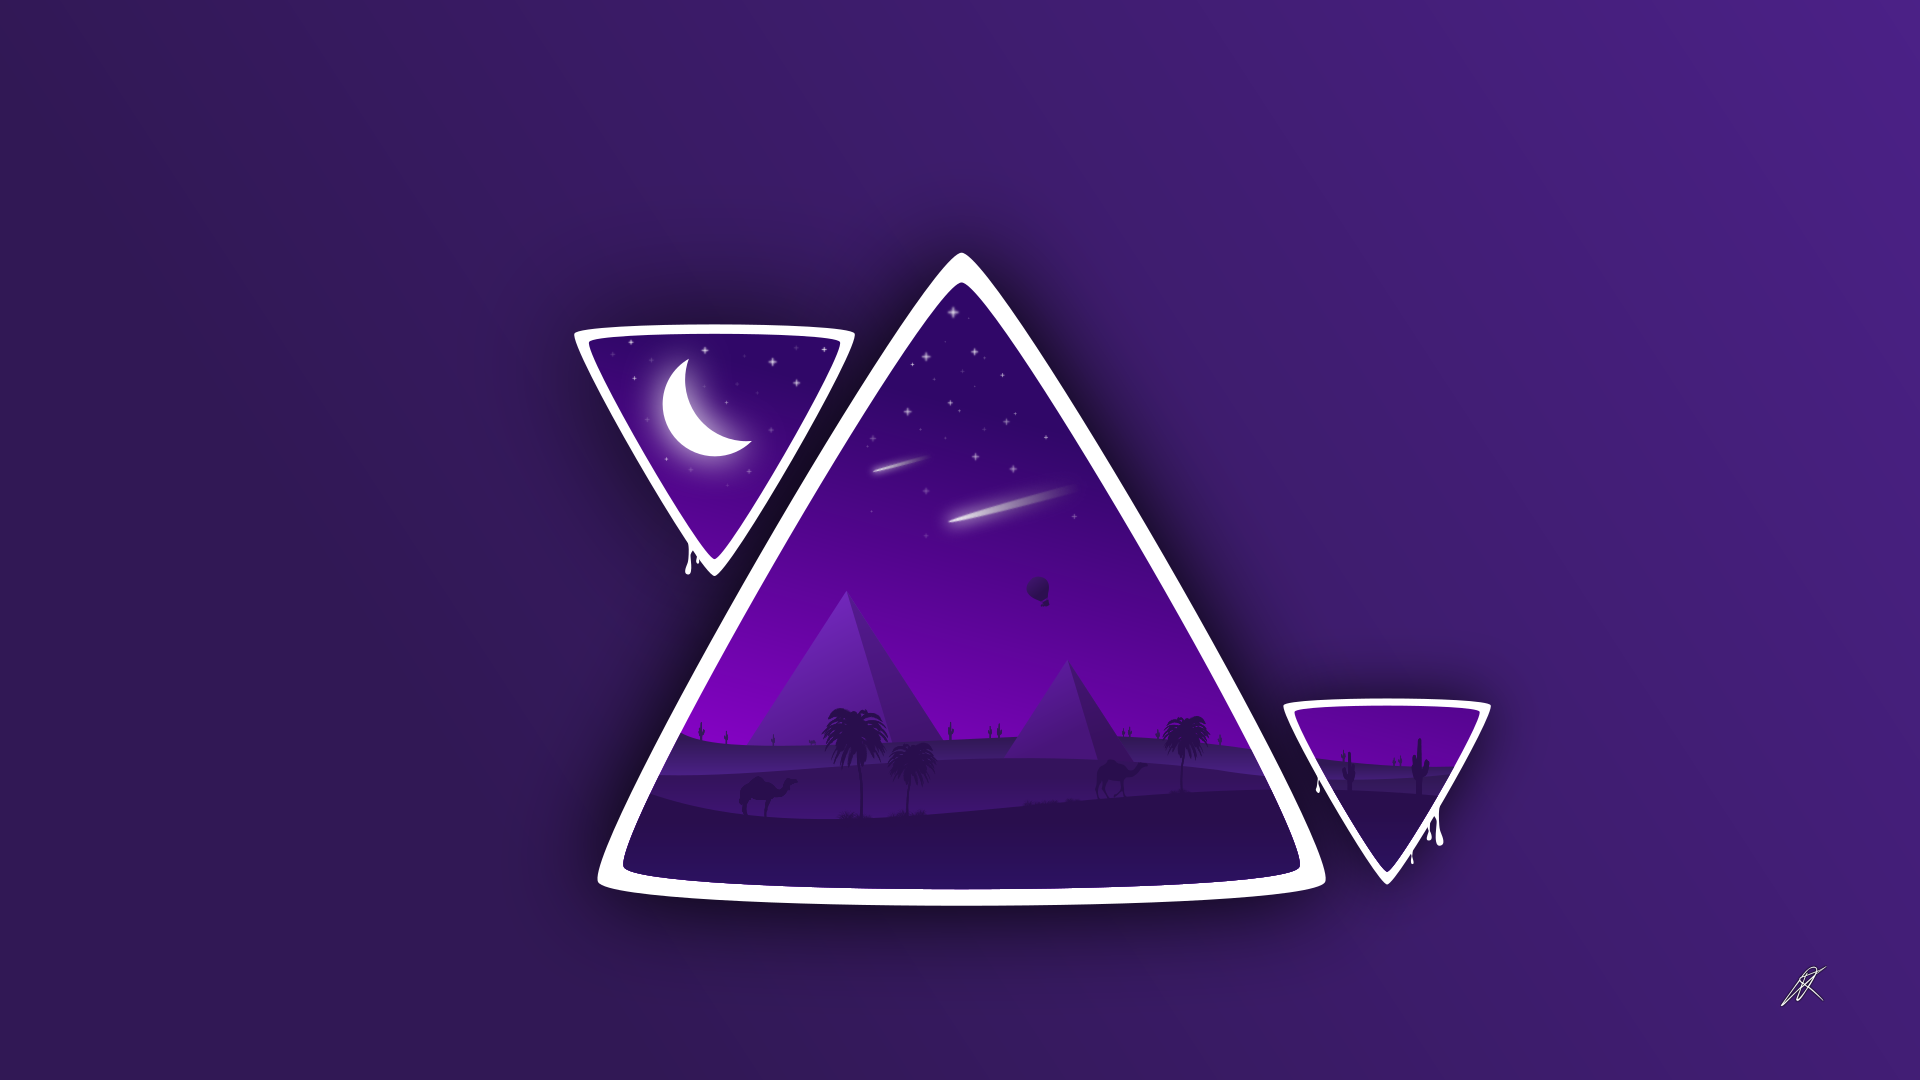 General 1920x1080 desert night vector camels pyramid illustration simple background purple background